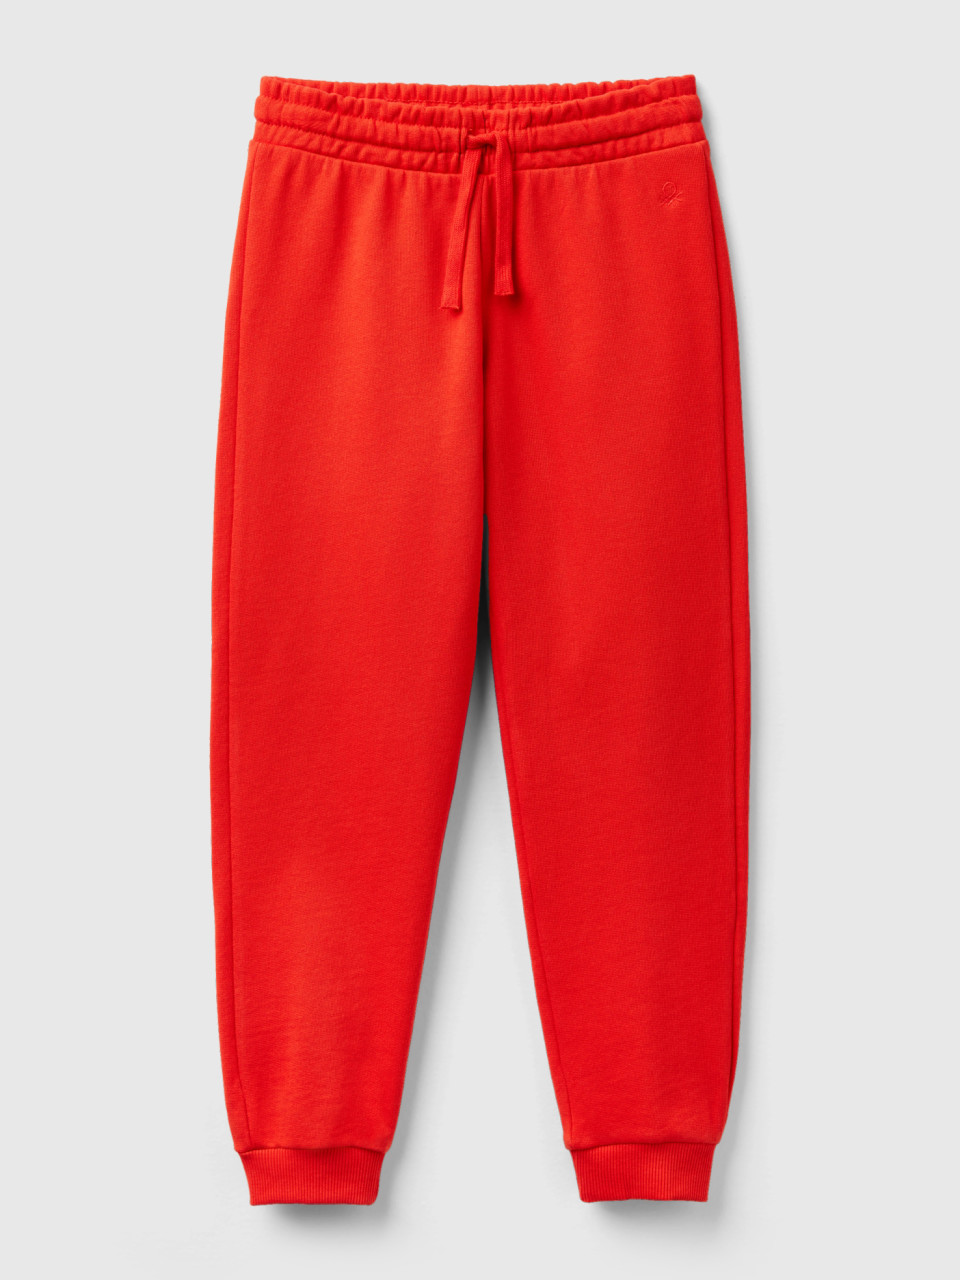 Benetton, Sweatpants With Logo, Red, Kids